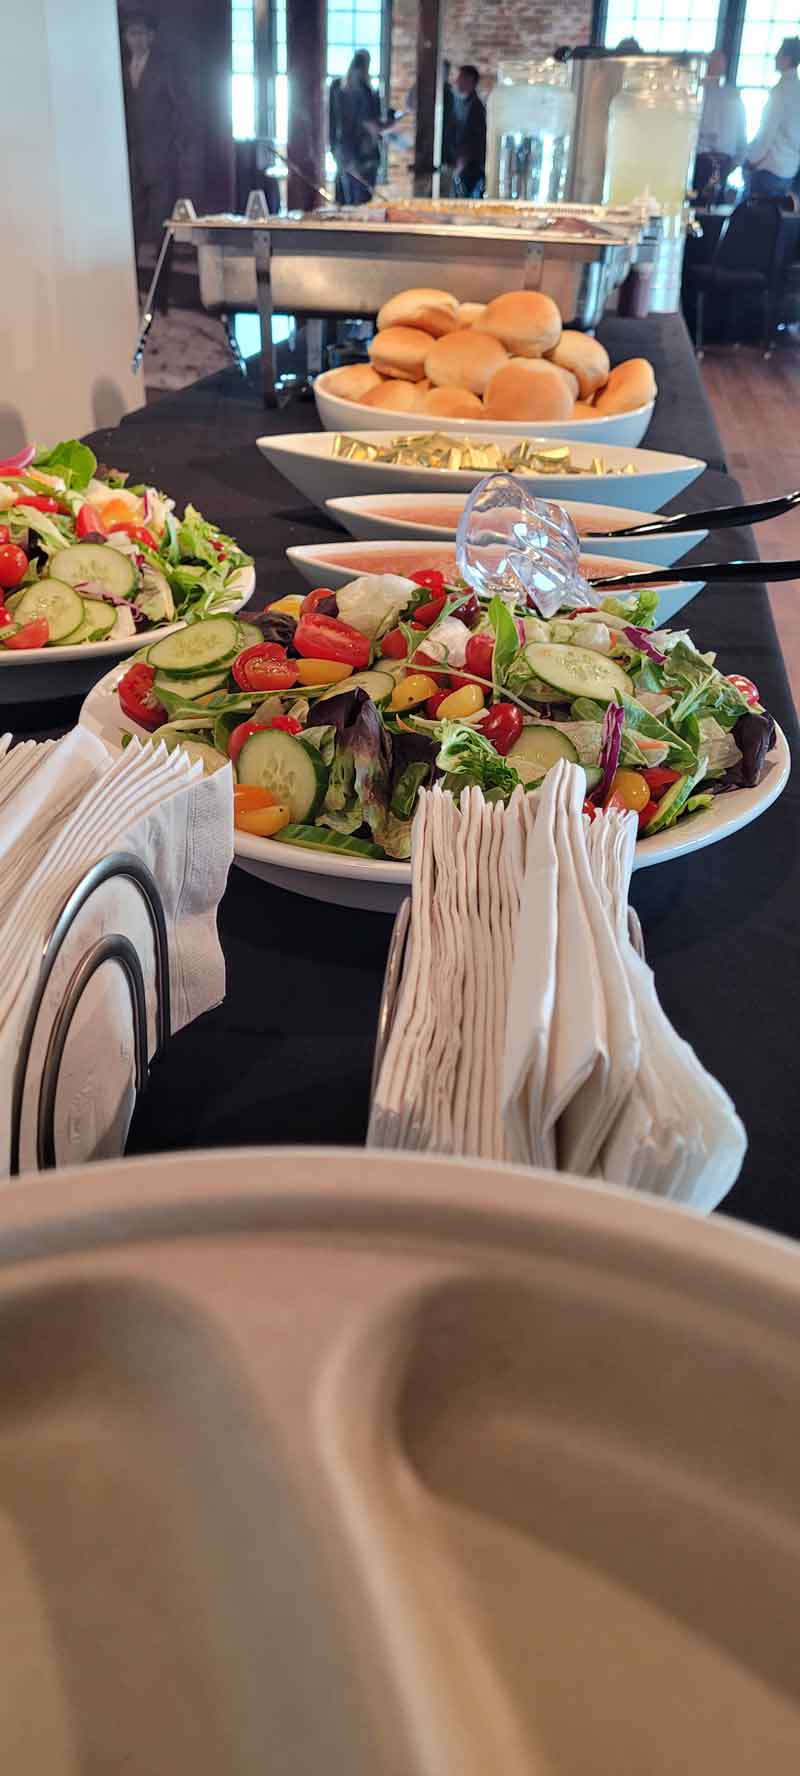 Salad options for catering from BBQ Brothers.